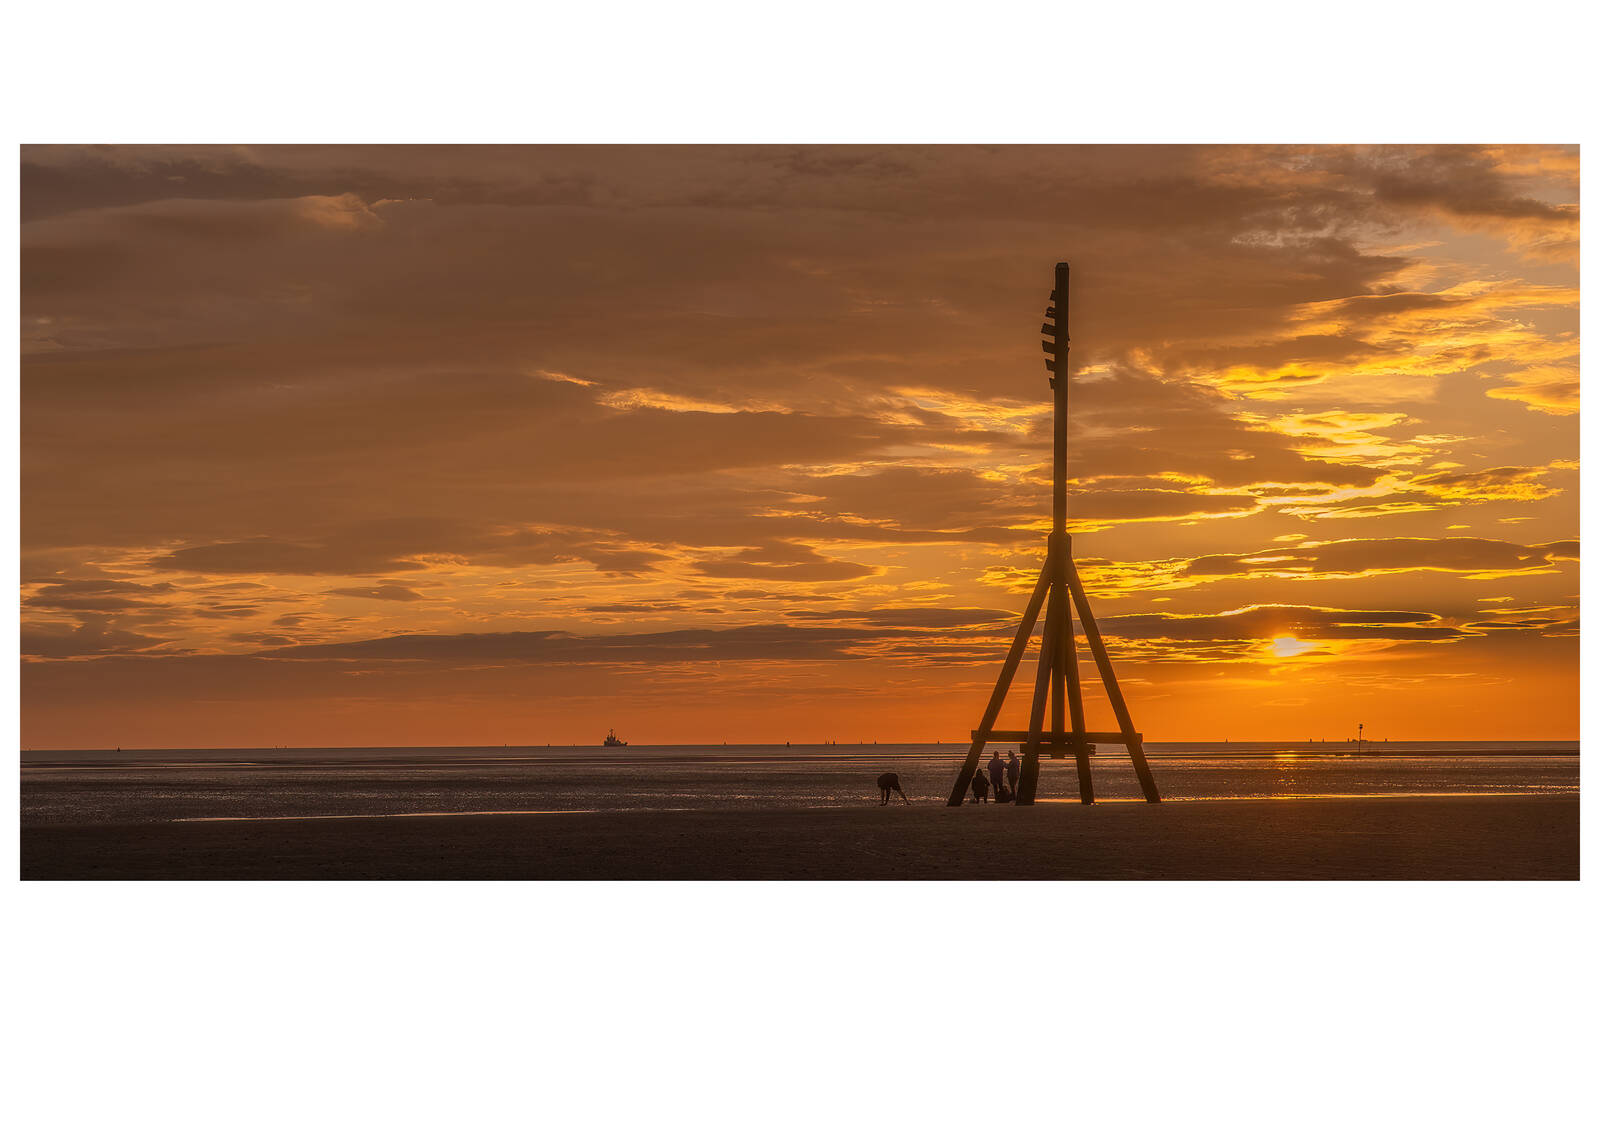 Image of Crosby Beach by jacqui prout